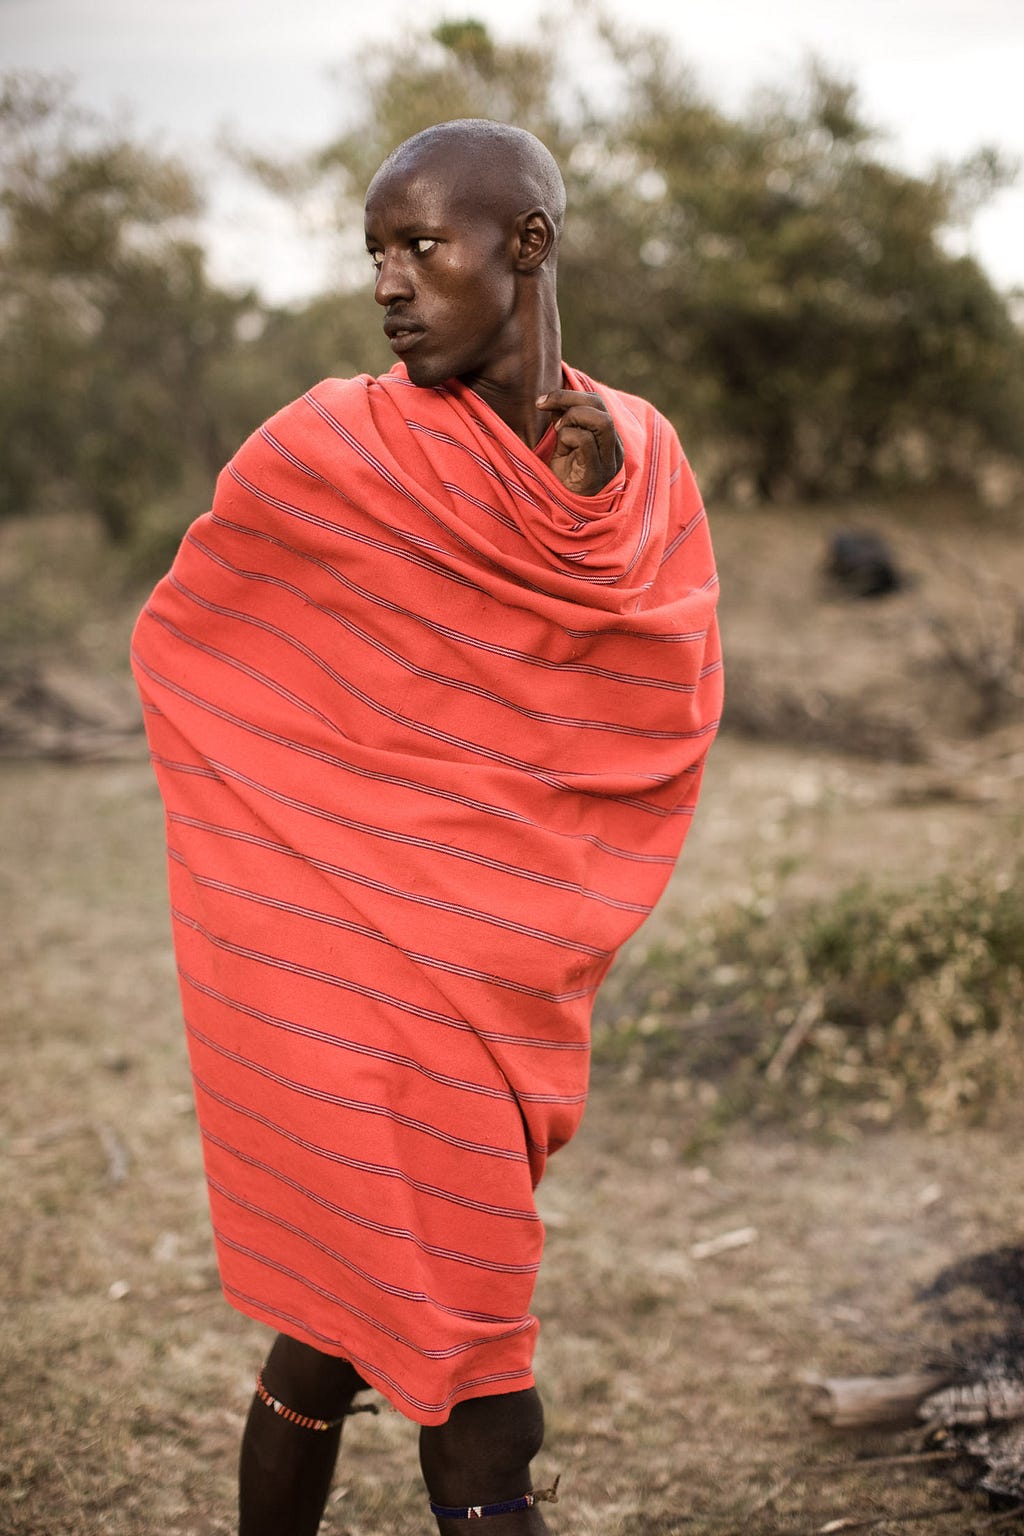 Maasai trade livestock for the purchase of grains, beads, and clothing. Cows and goats are also sold for uniforms and school fees; those sent away from the manyatta to seek higher education often feel like outcasts